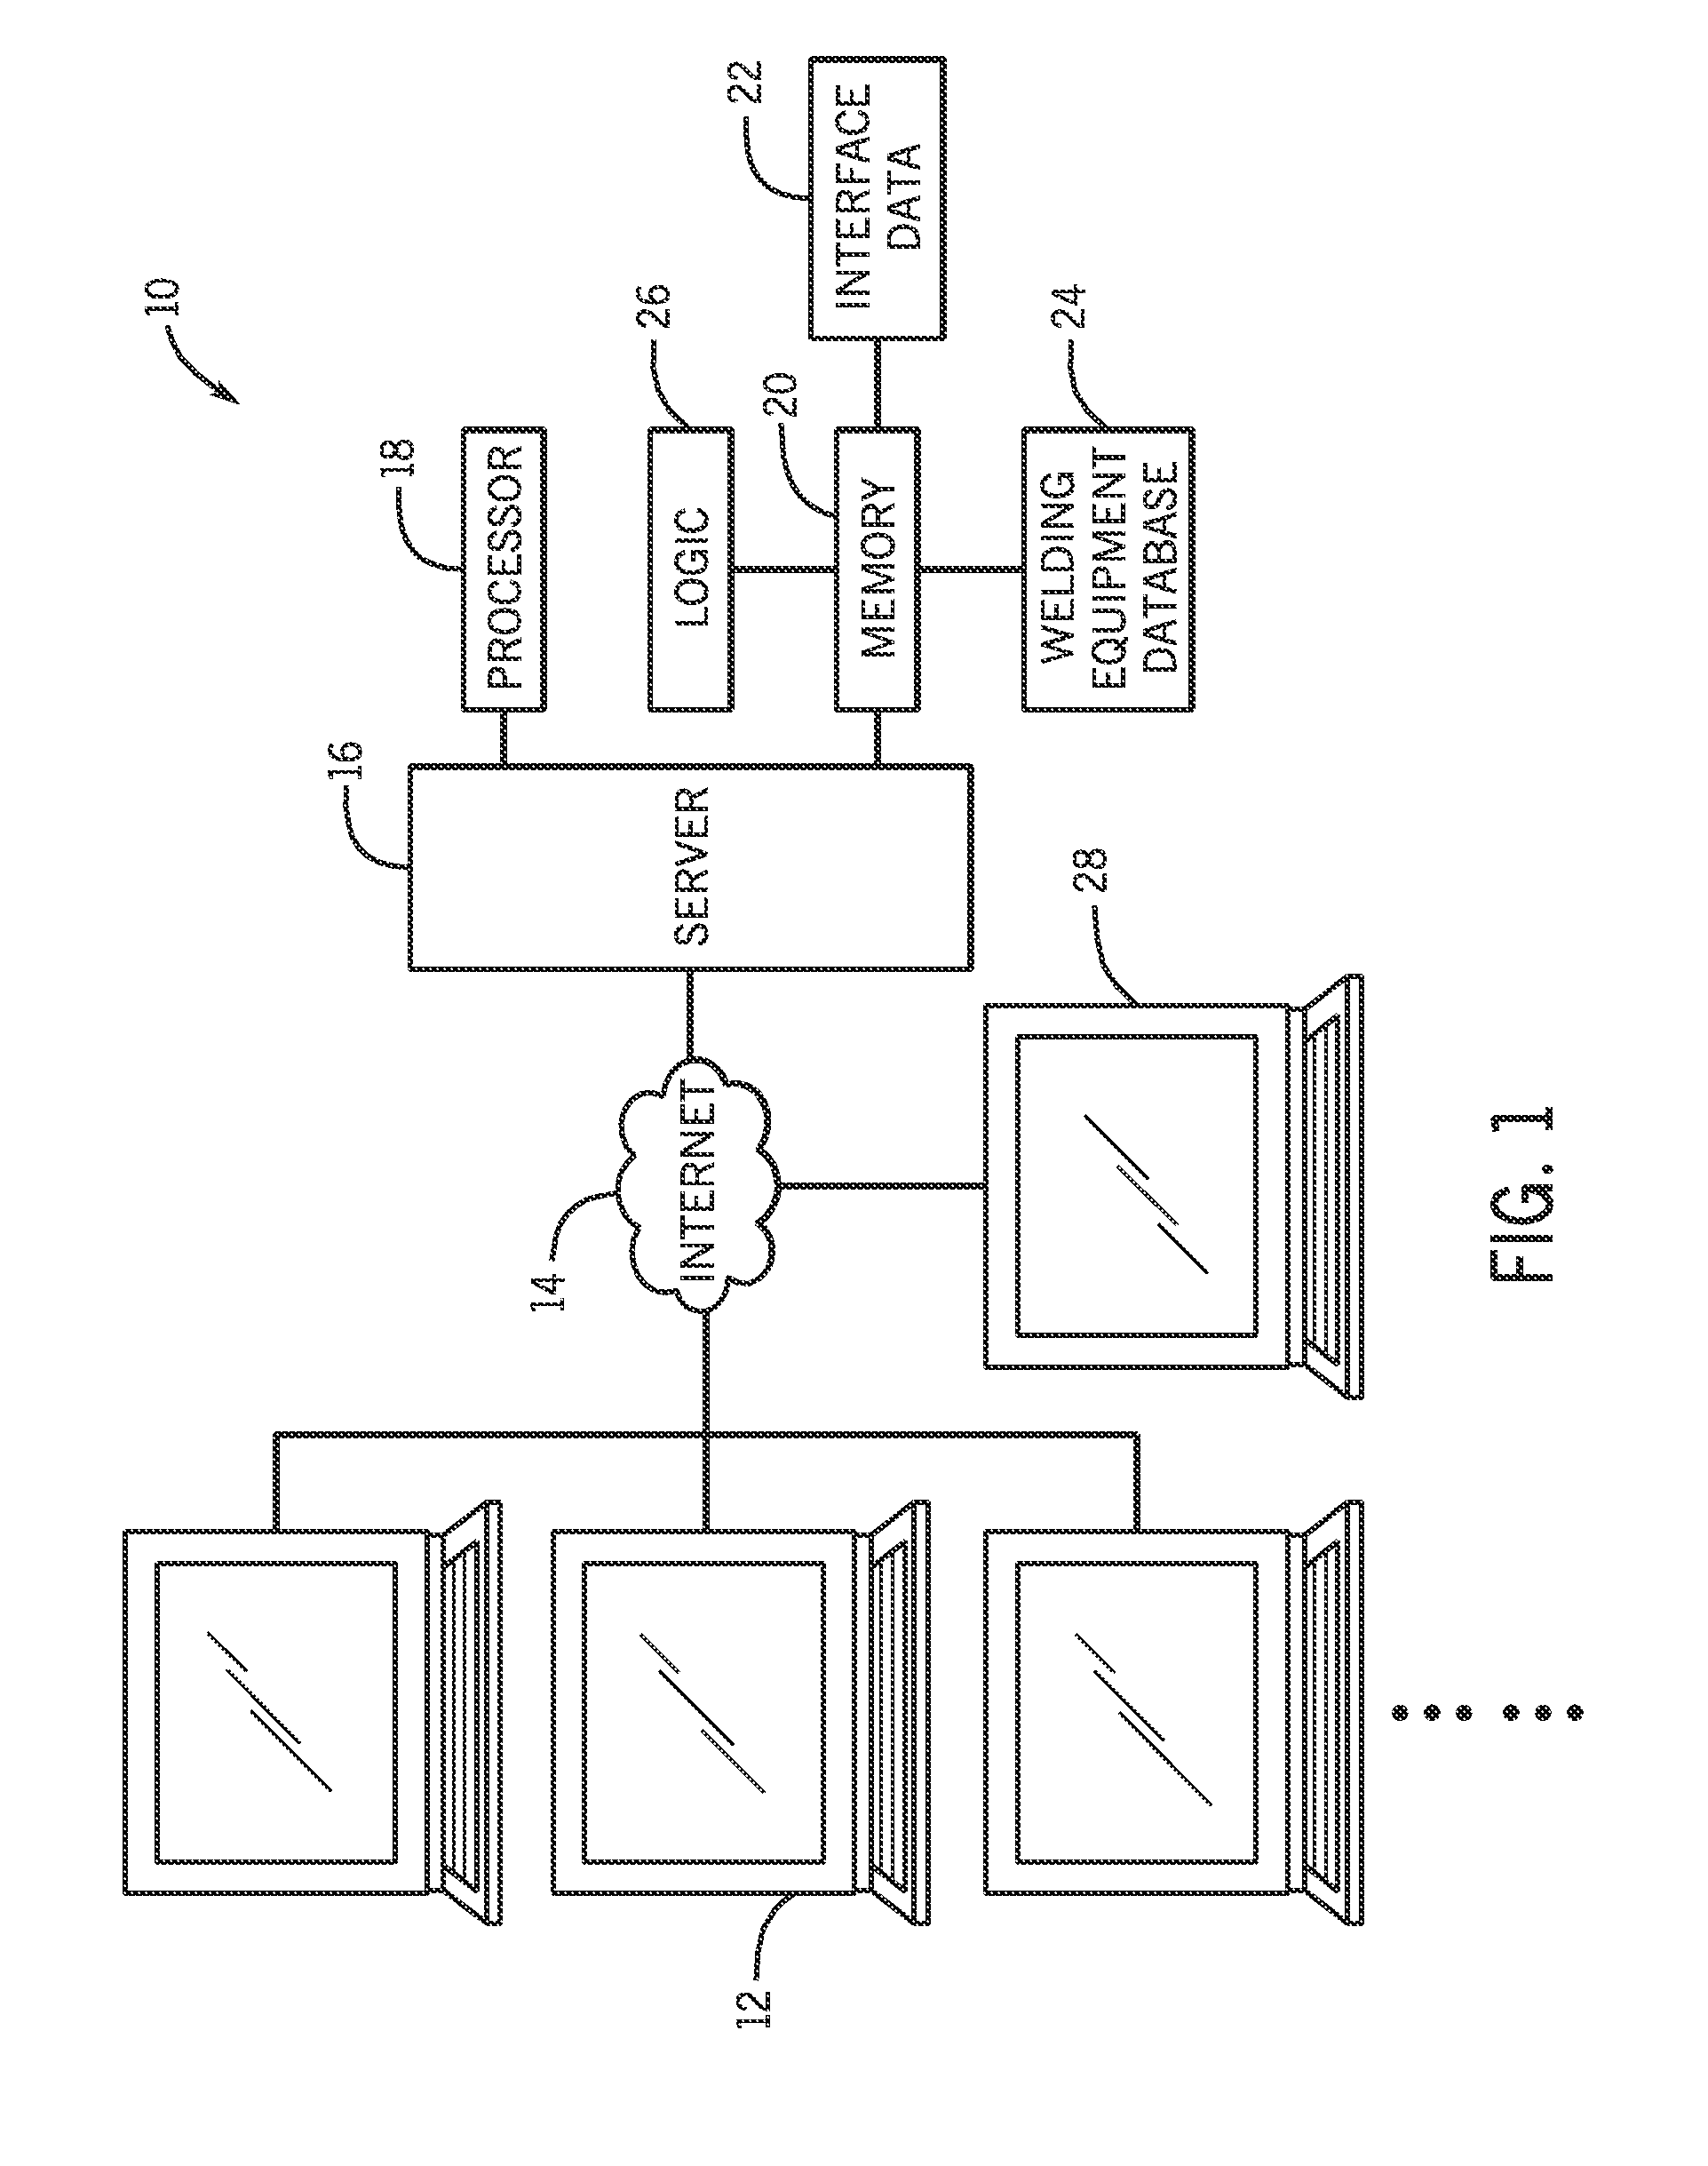 Web configuration system for customizing welding systems